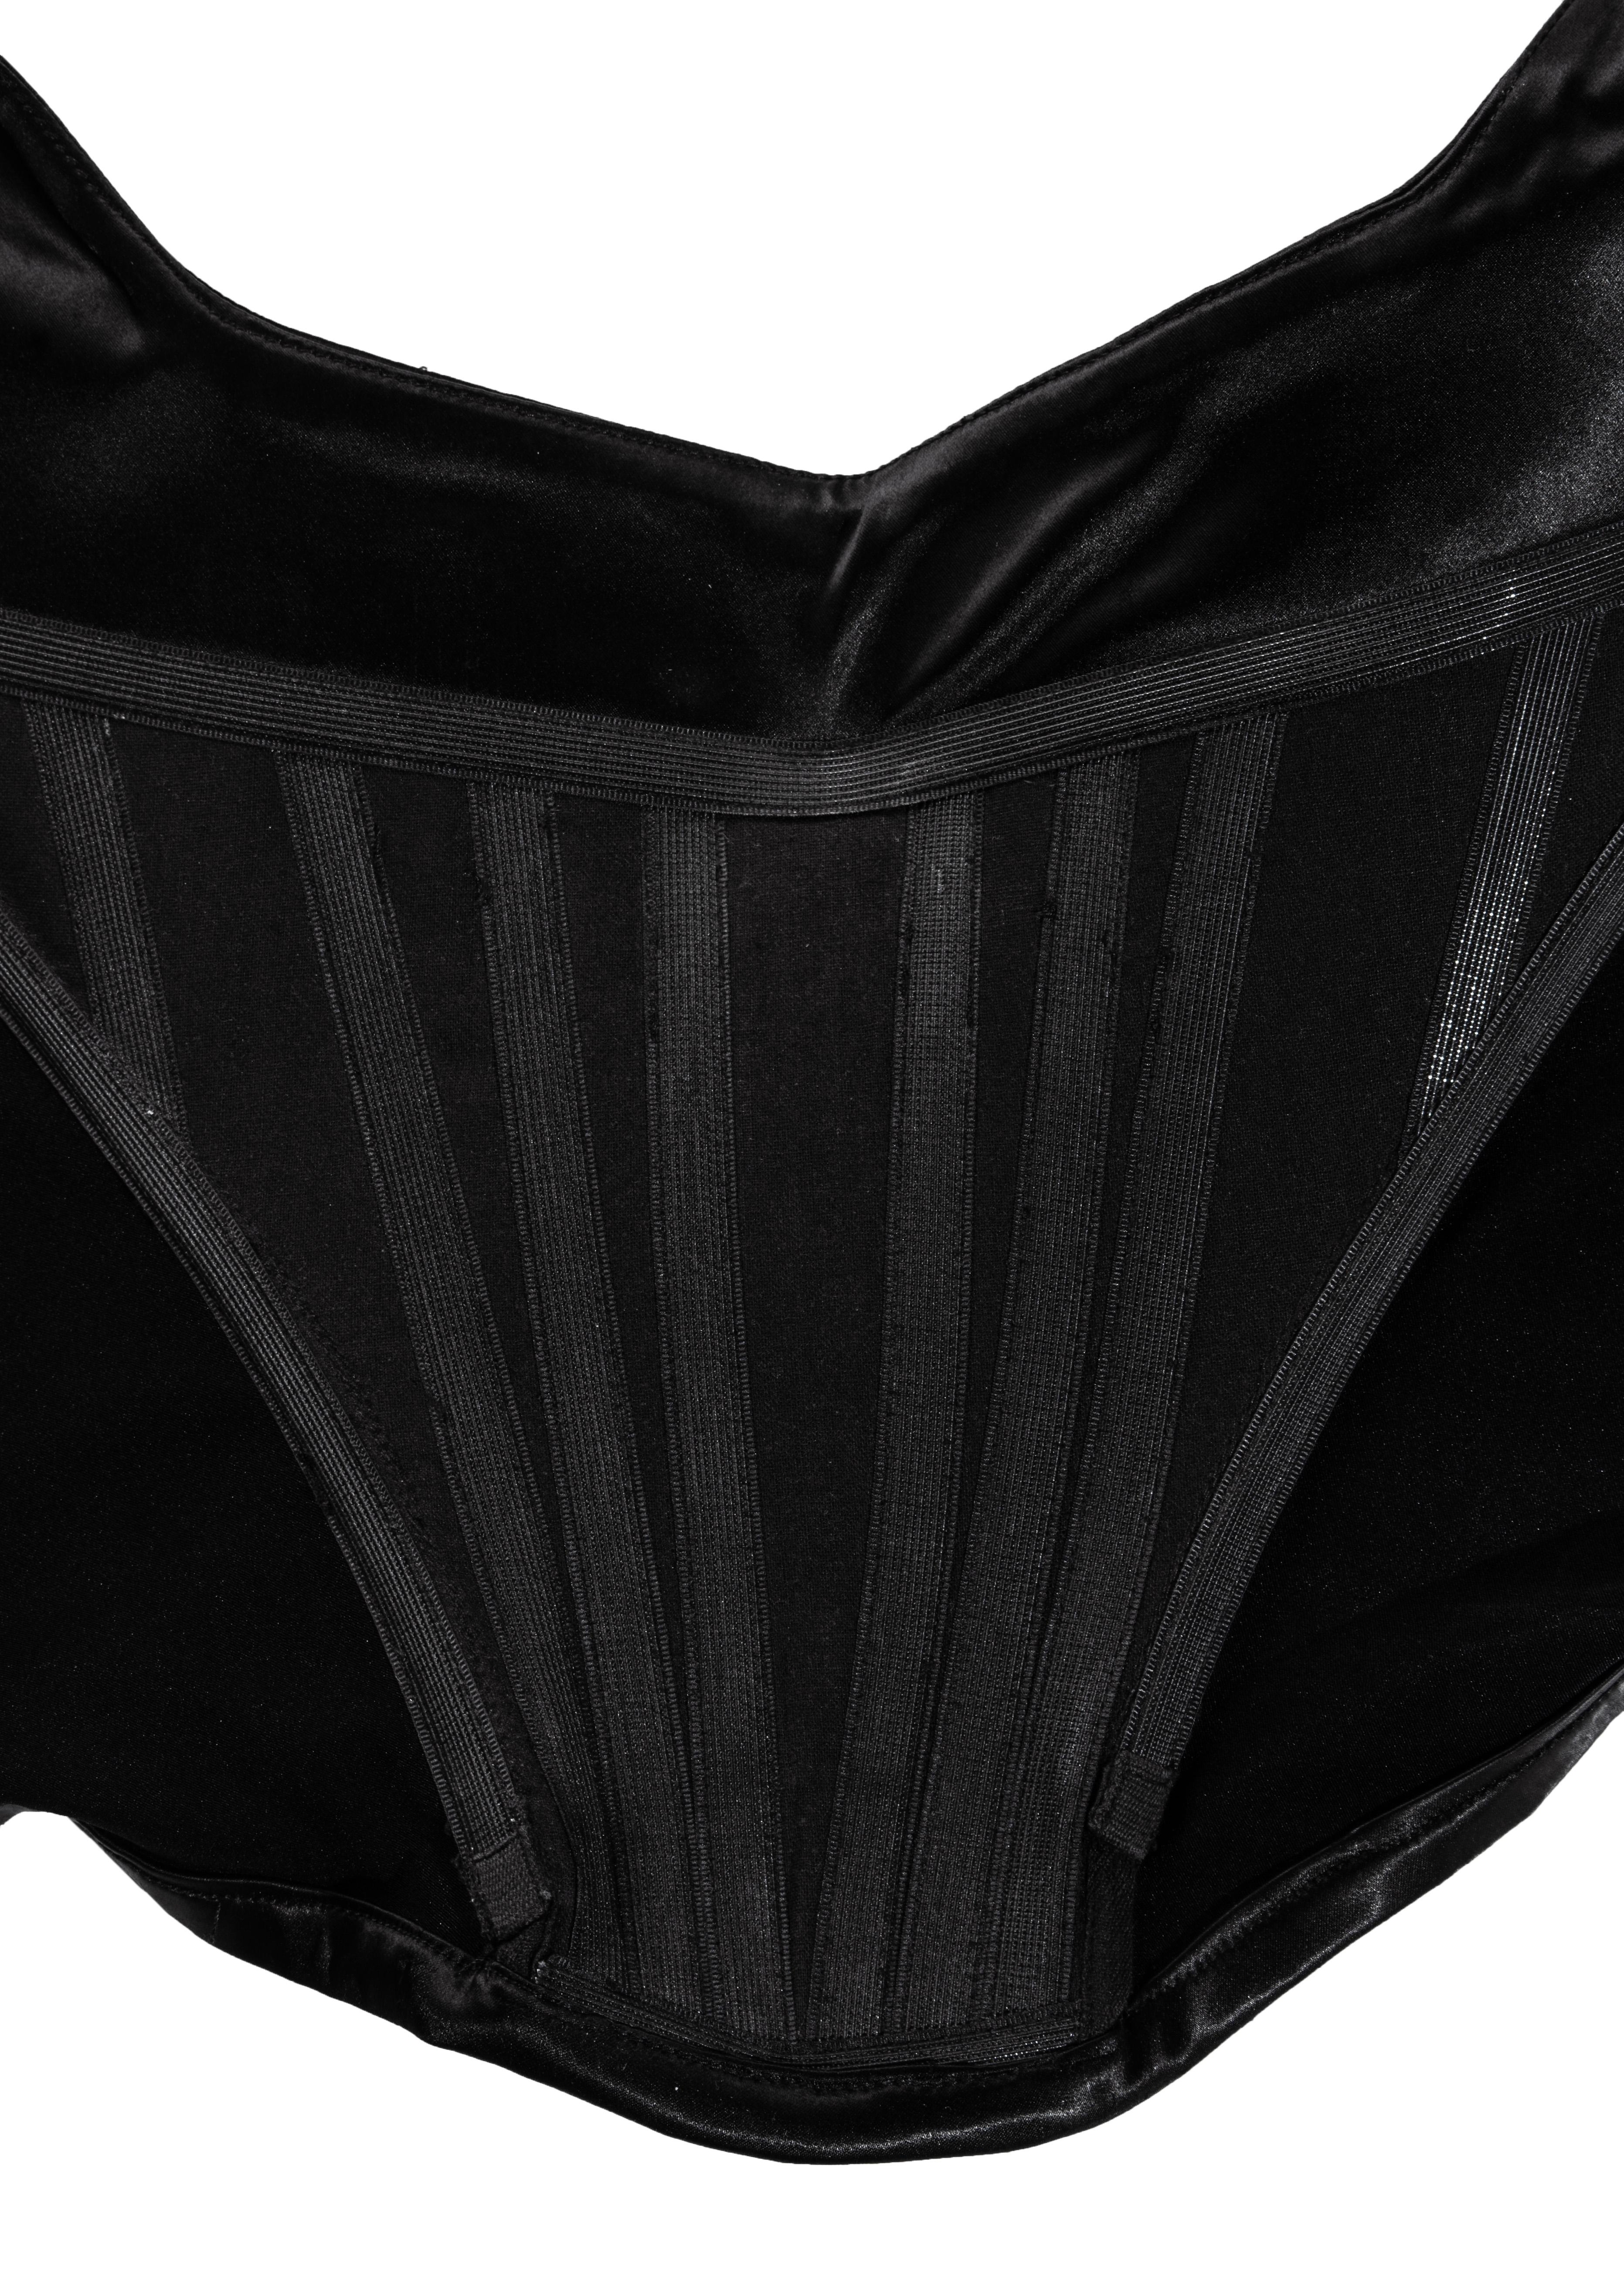 Vivienne Westwood black satin evening corset, c. 1990s In Good Condition For Sale In London, GB